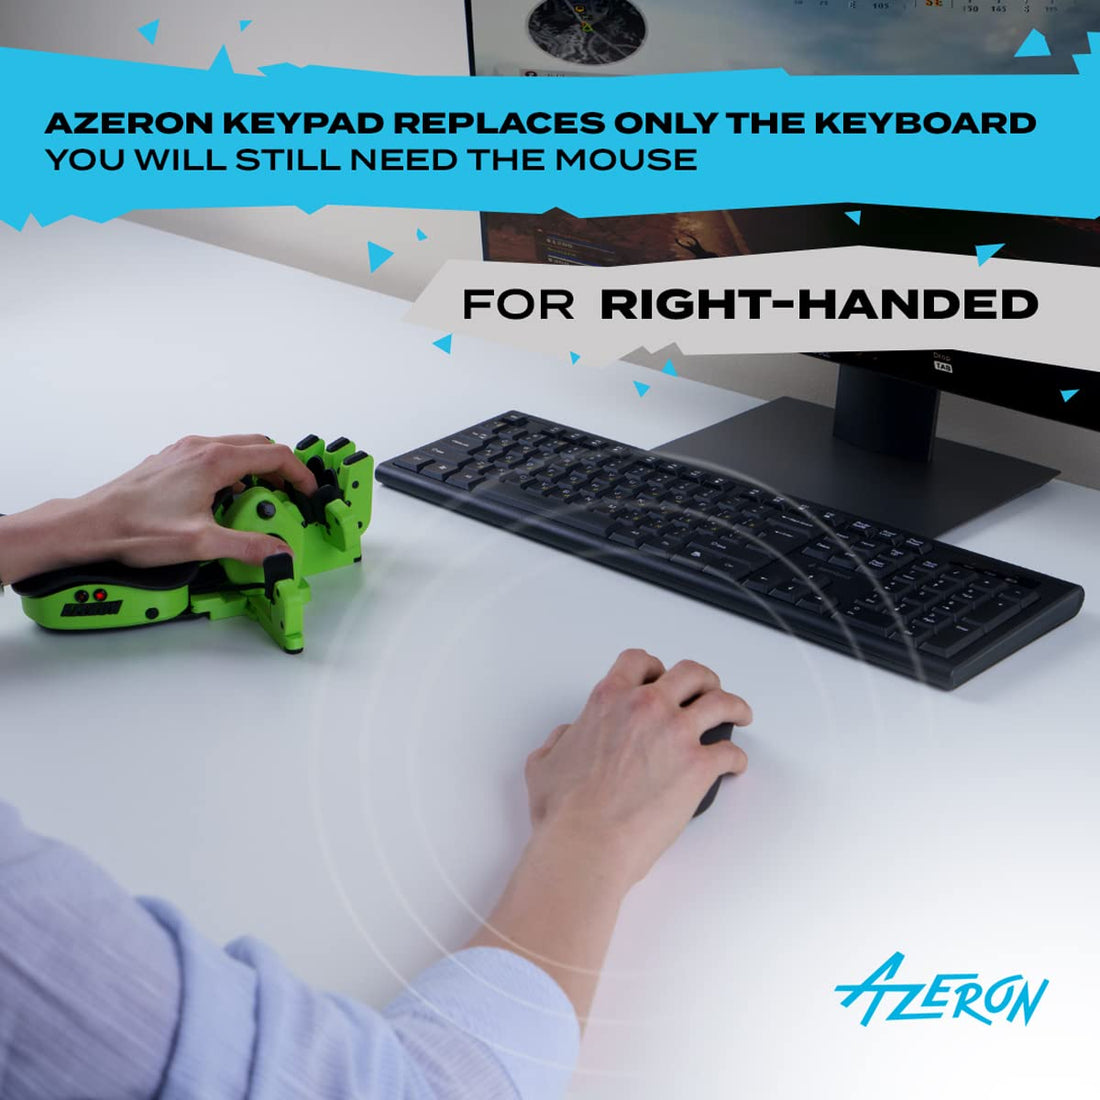 Azeron Compact Gaming keypad - Programmable Gaming Keyboard for PC & Console Gaming - Customized, 3D Printed Analog Thumbstick keypad with 24 Buttons - for Righties